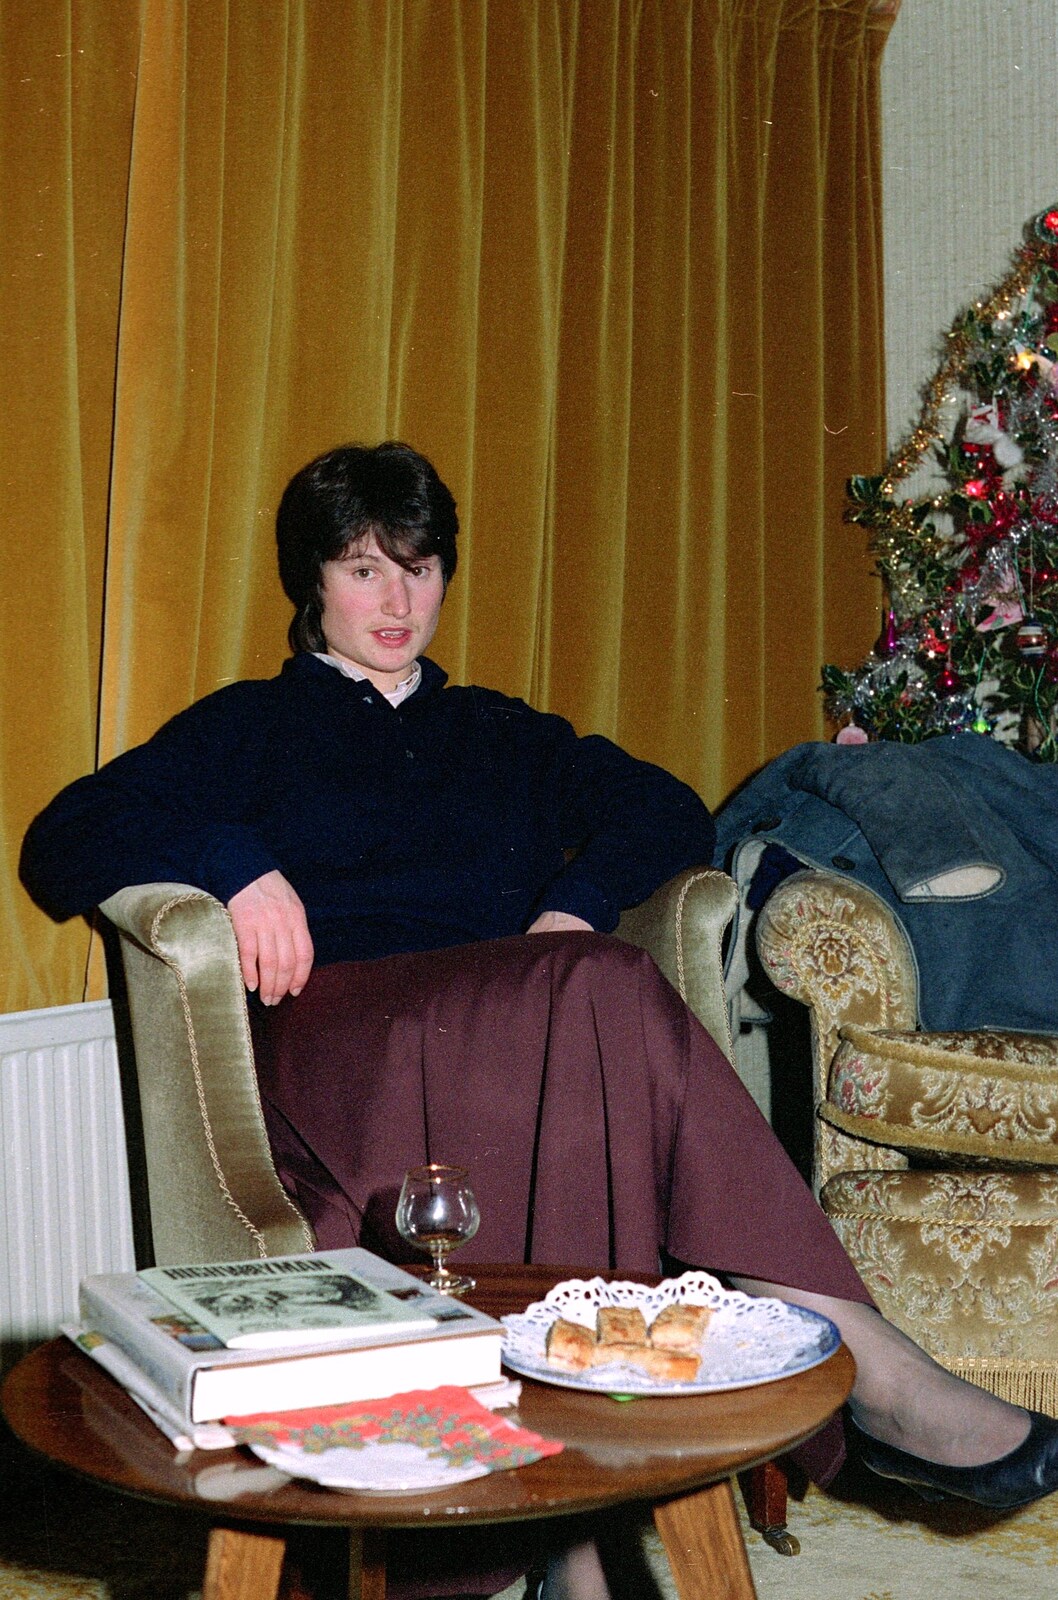 Angela waits for midnight mass from Uni: A Dinner Party, Harbertonford and Buckfastleigh, Devon - 24th December 1988